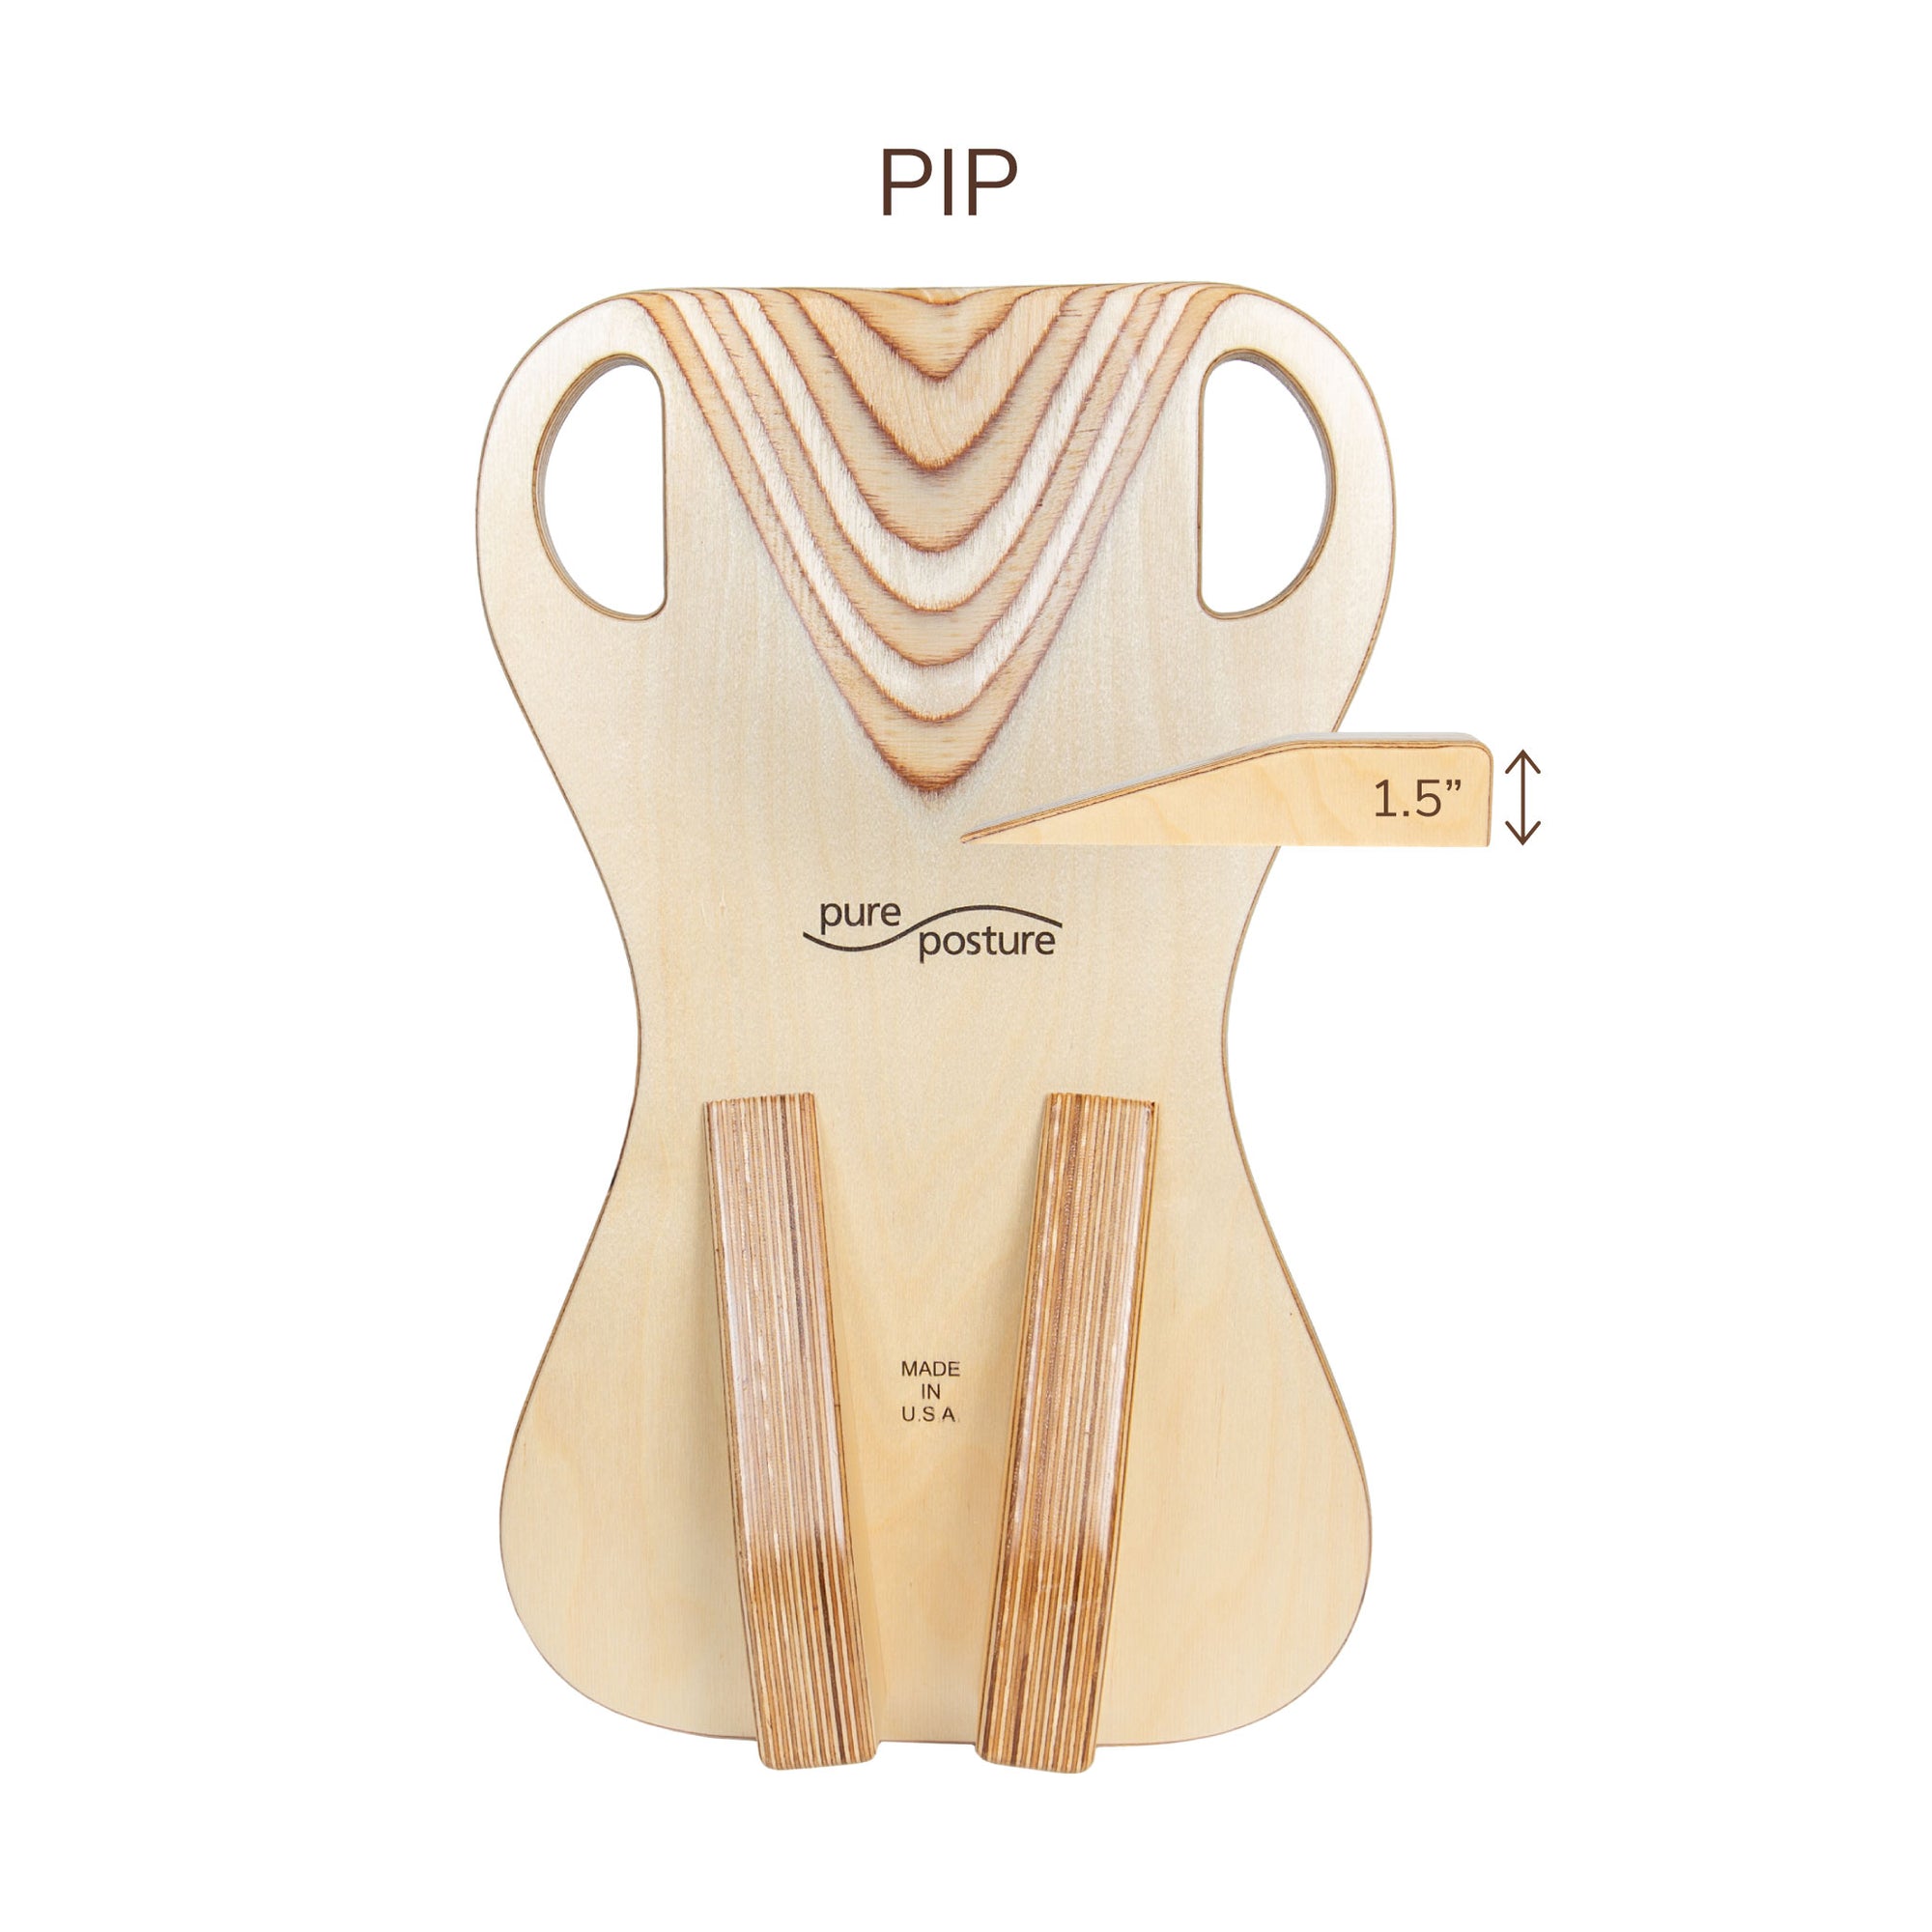 PIP PurePosture Board for back pain